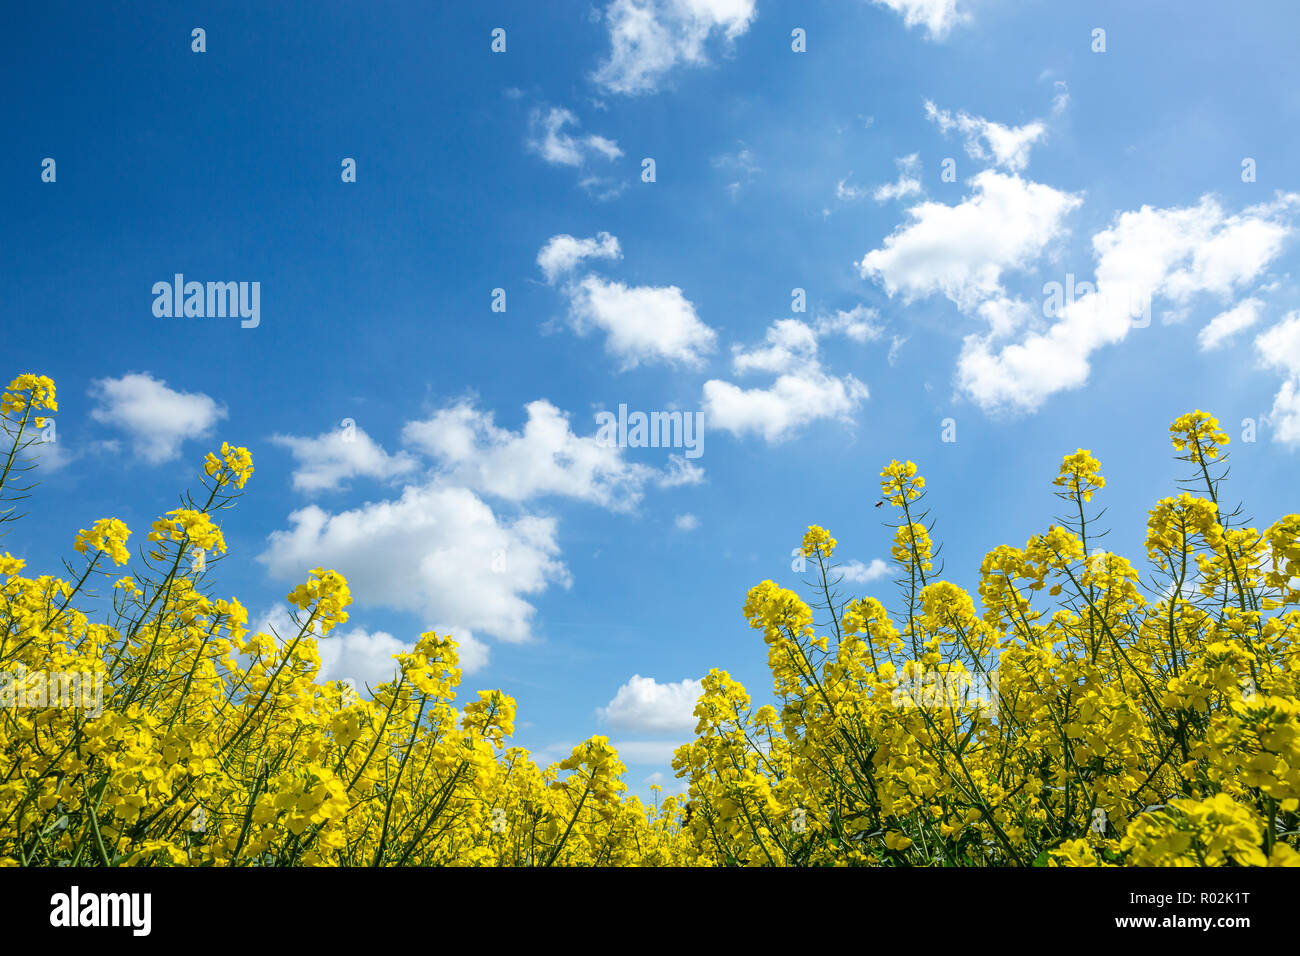 Yellow rapeseed flowers and beautiful blue sky and scattered white clouds on a sunny day in May, Coventry, West Midlands, England, UK Stock Photo